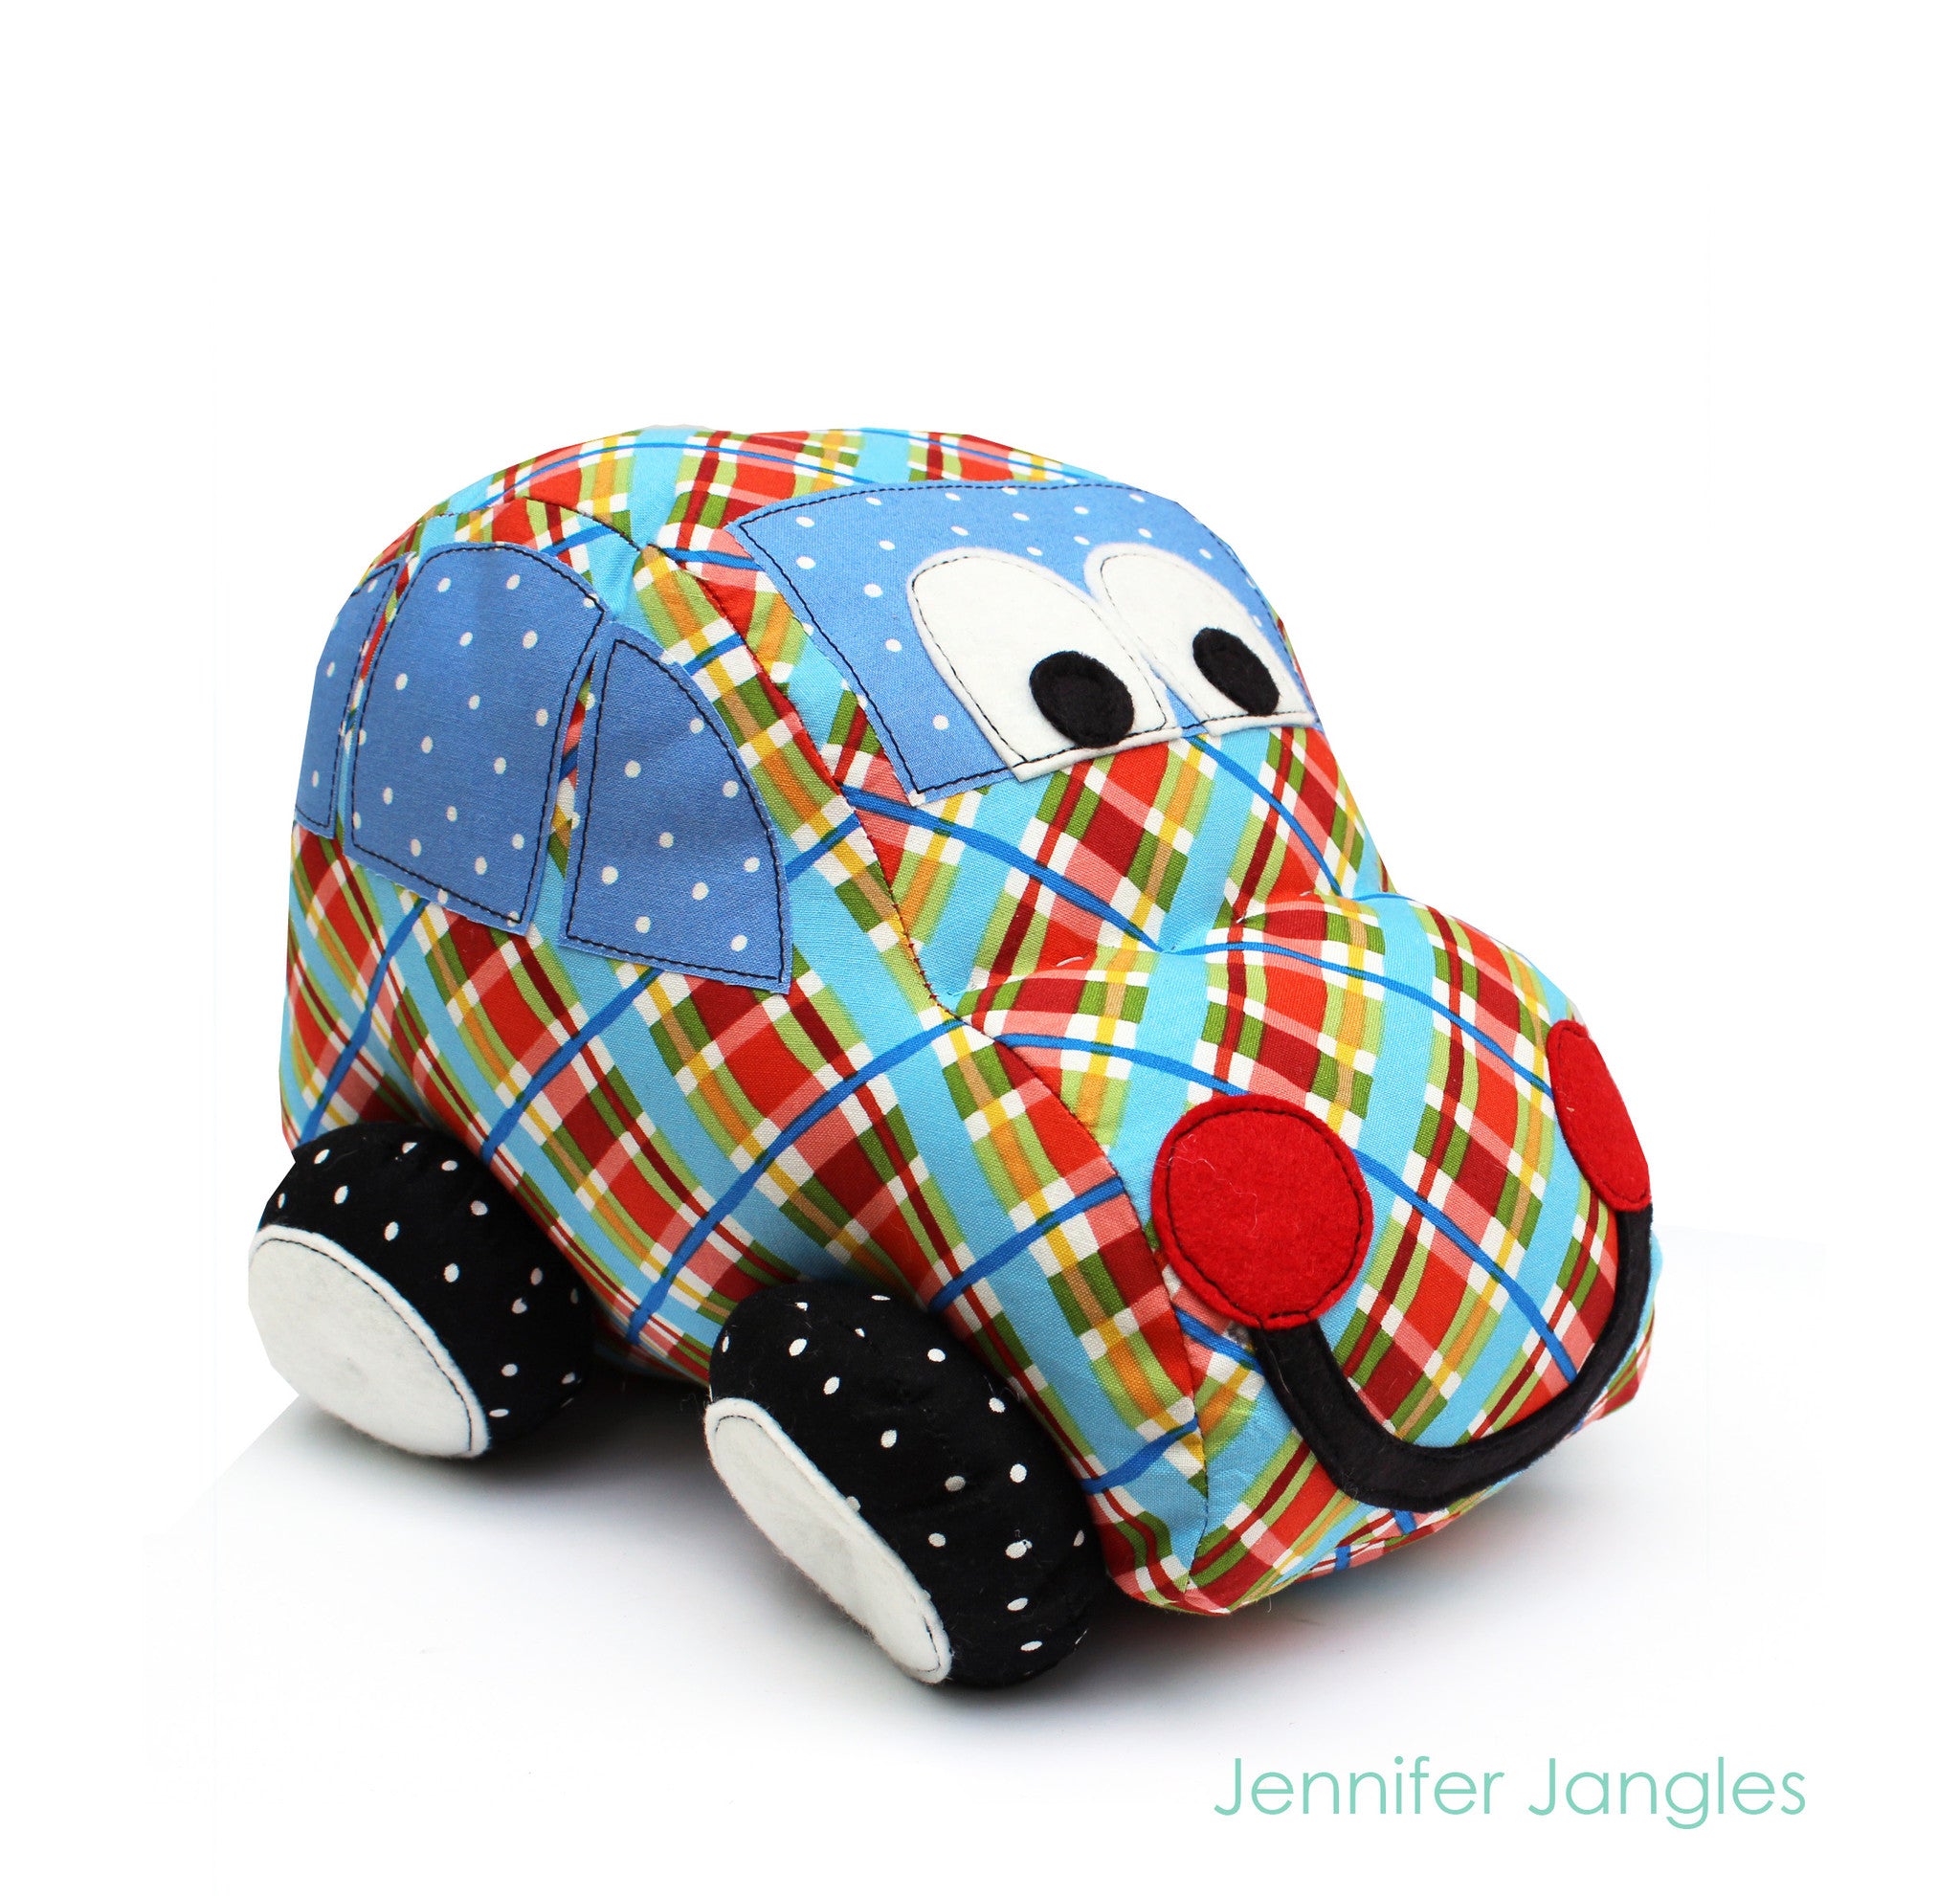 Sewing Café - We sew toys